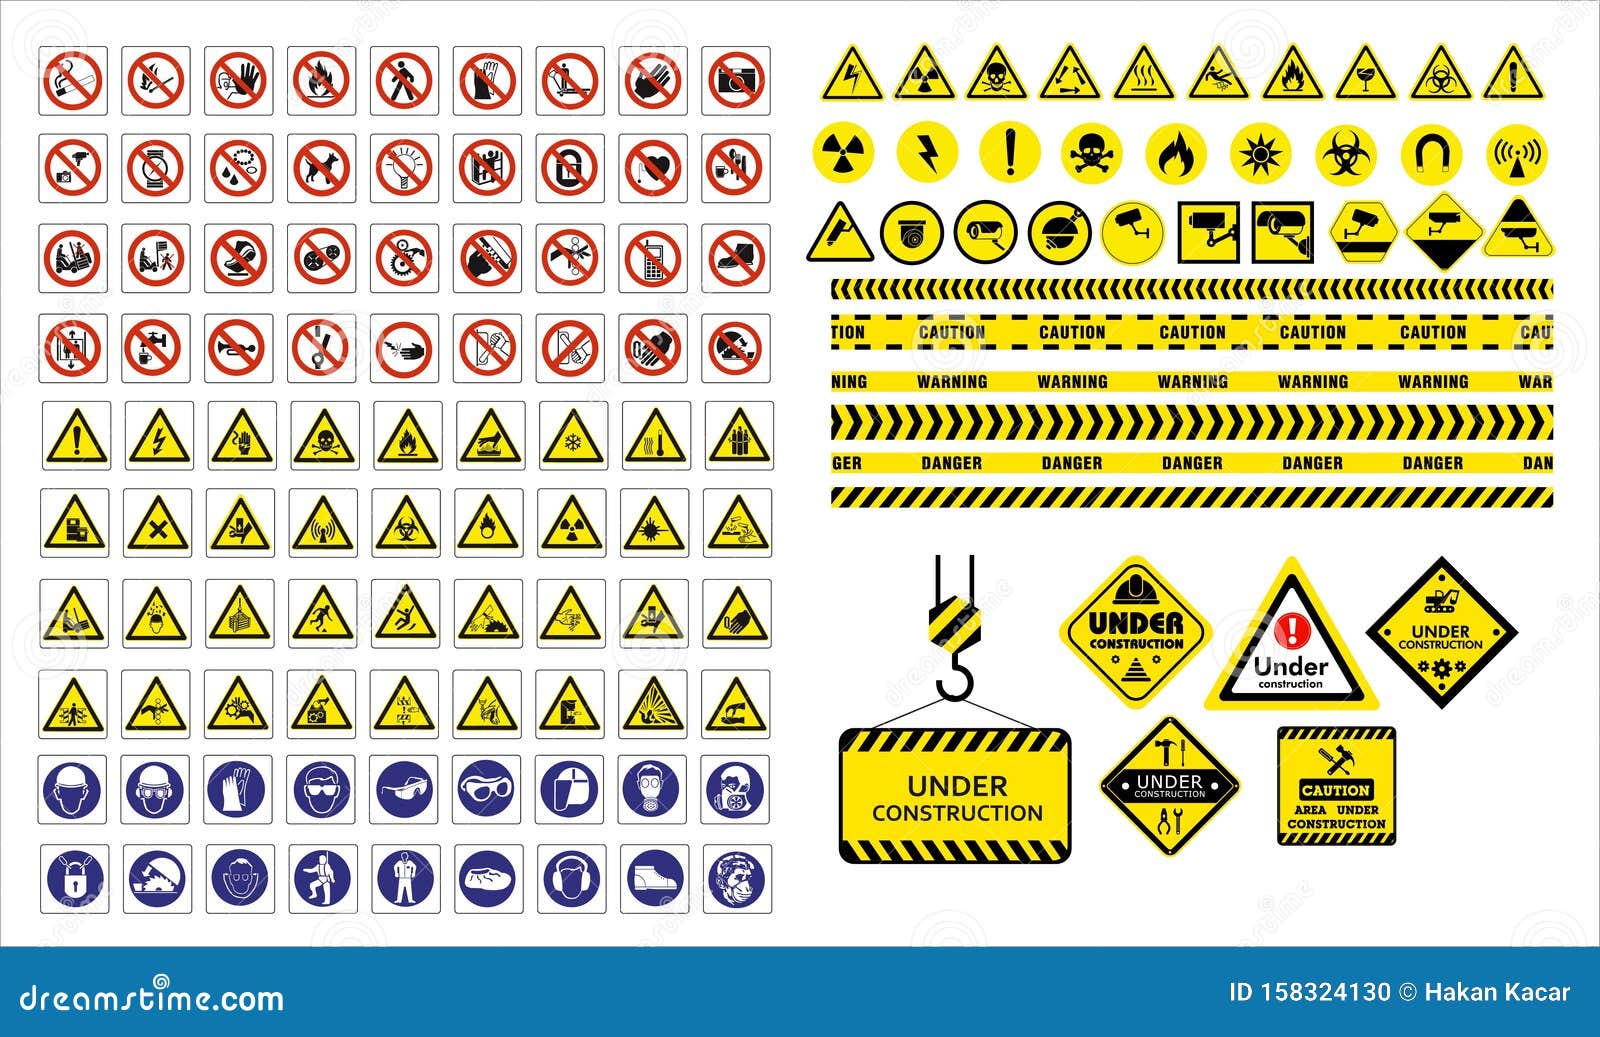 PROHIBITION WORKPLACE EMERGENCY HEALTH & SAFETY SIGNS WATERPROOF COSHH HACCP 